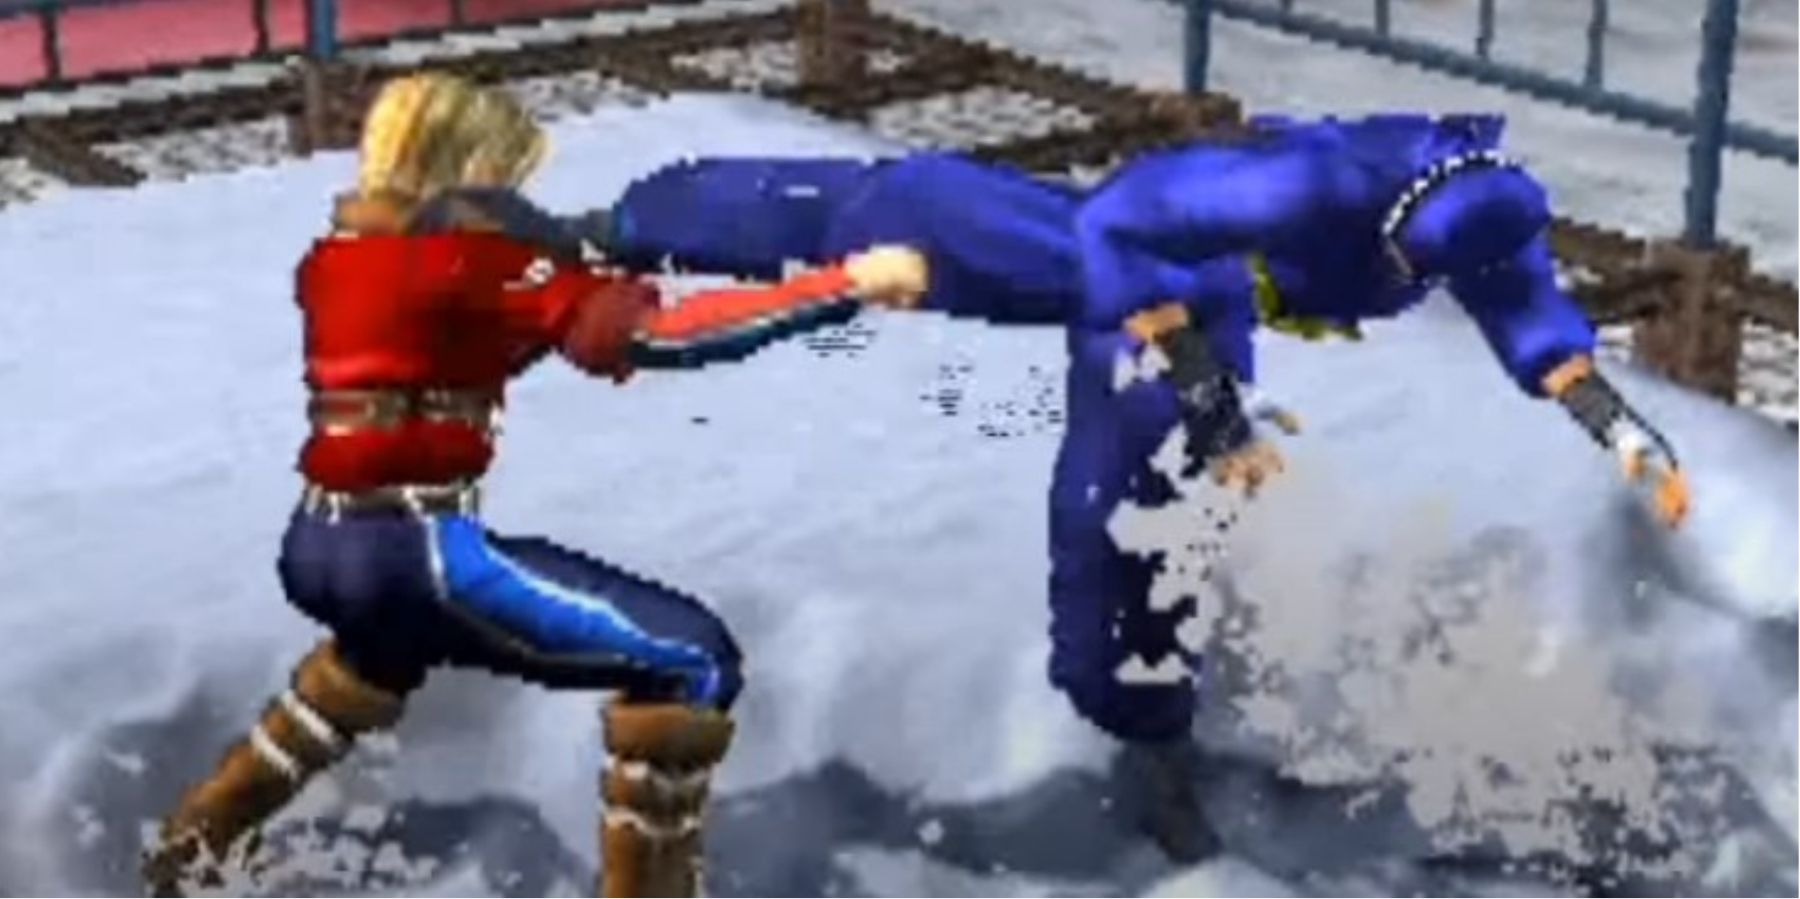 Virtua Fighter 4 Kage Kicking Opponent In The Neck